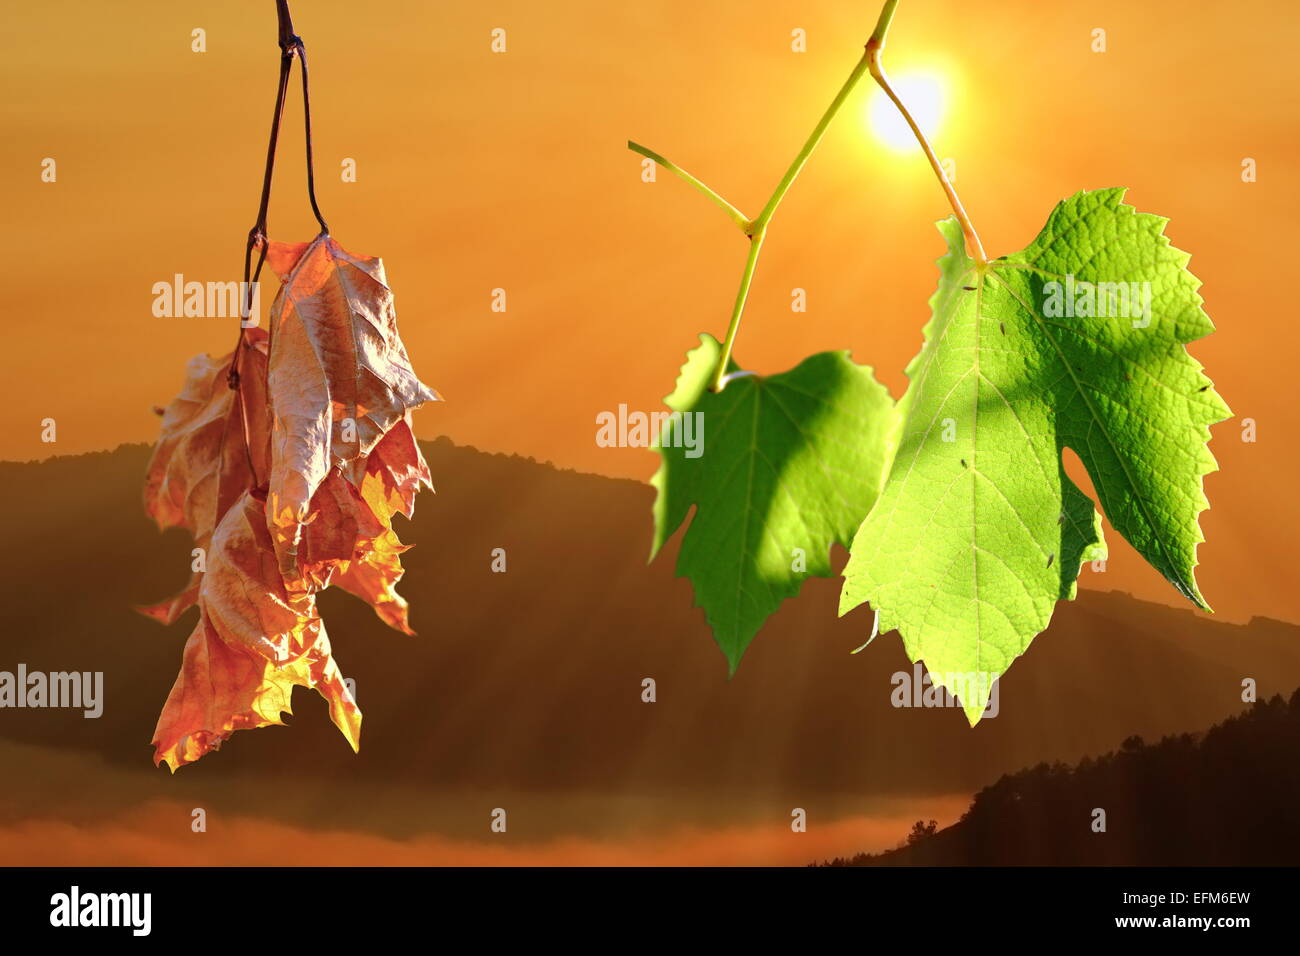 two life stages on vineyard leaves, natural sunrise backdrop over the hills Stock Photo